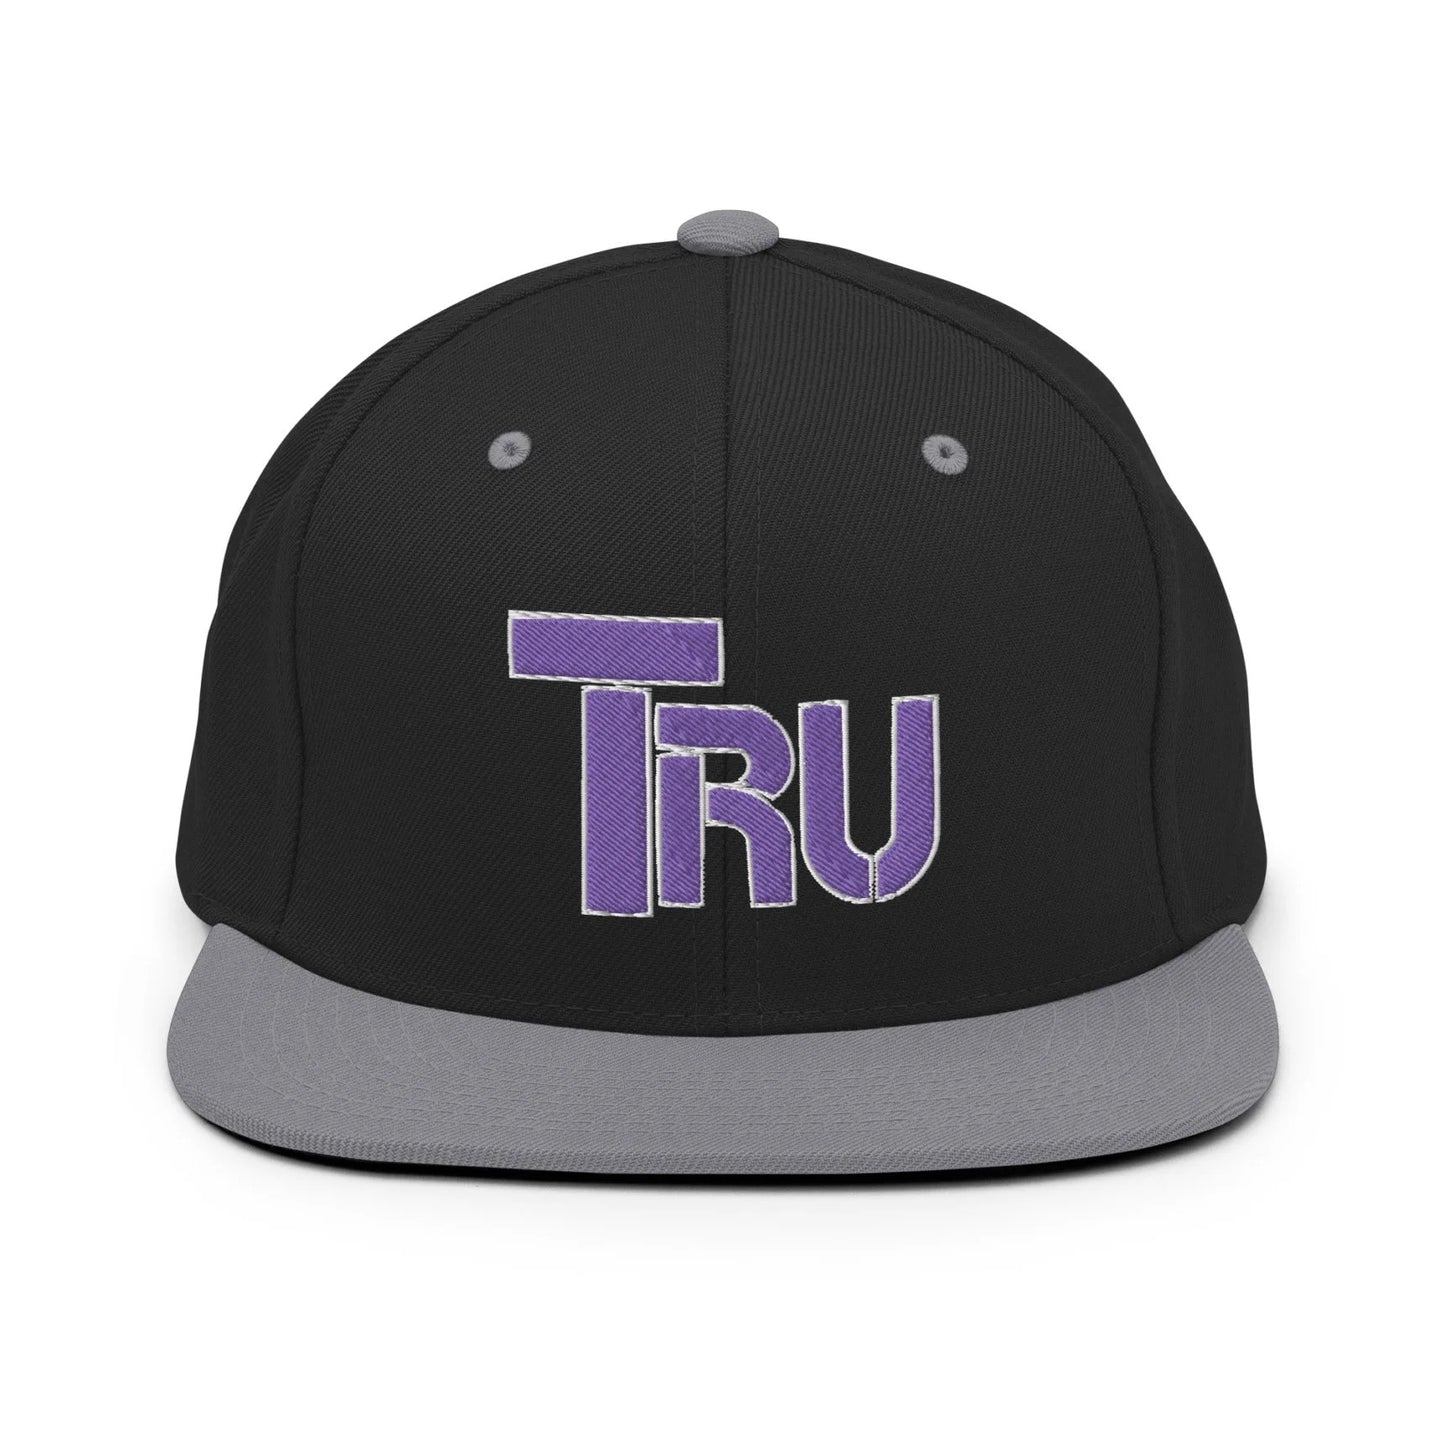 Tru ShowZone snapback hat in black with grey brim and accents